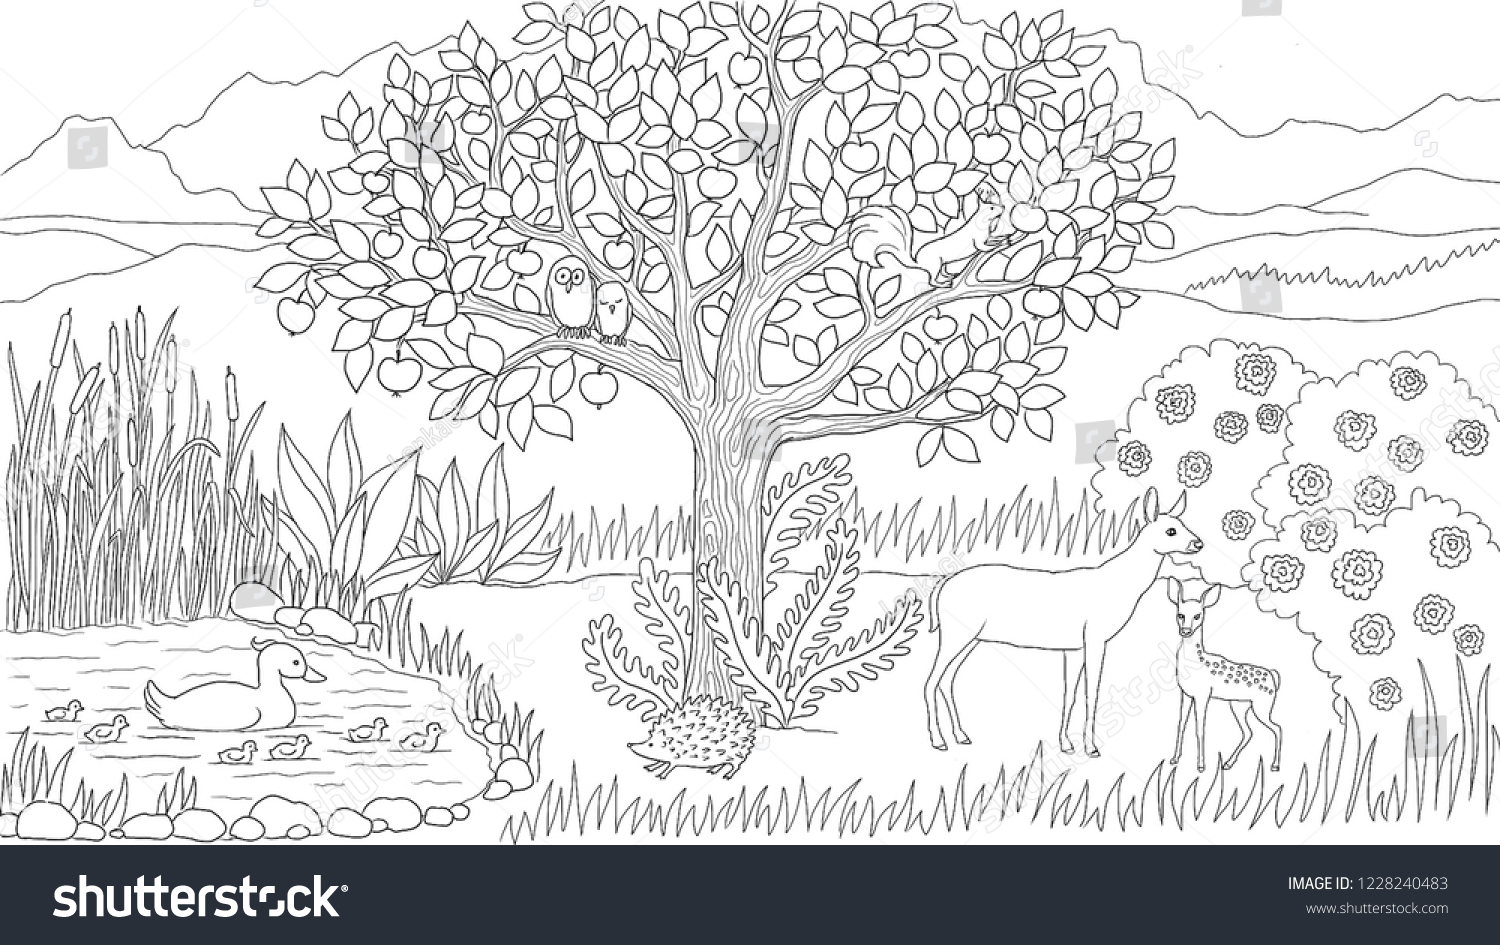 Meadow Nature Animals Illustration Coloring Page Stock ...